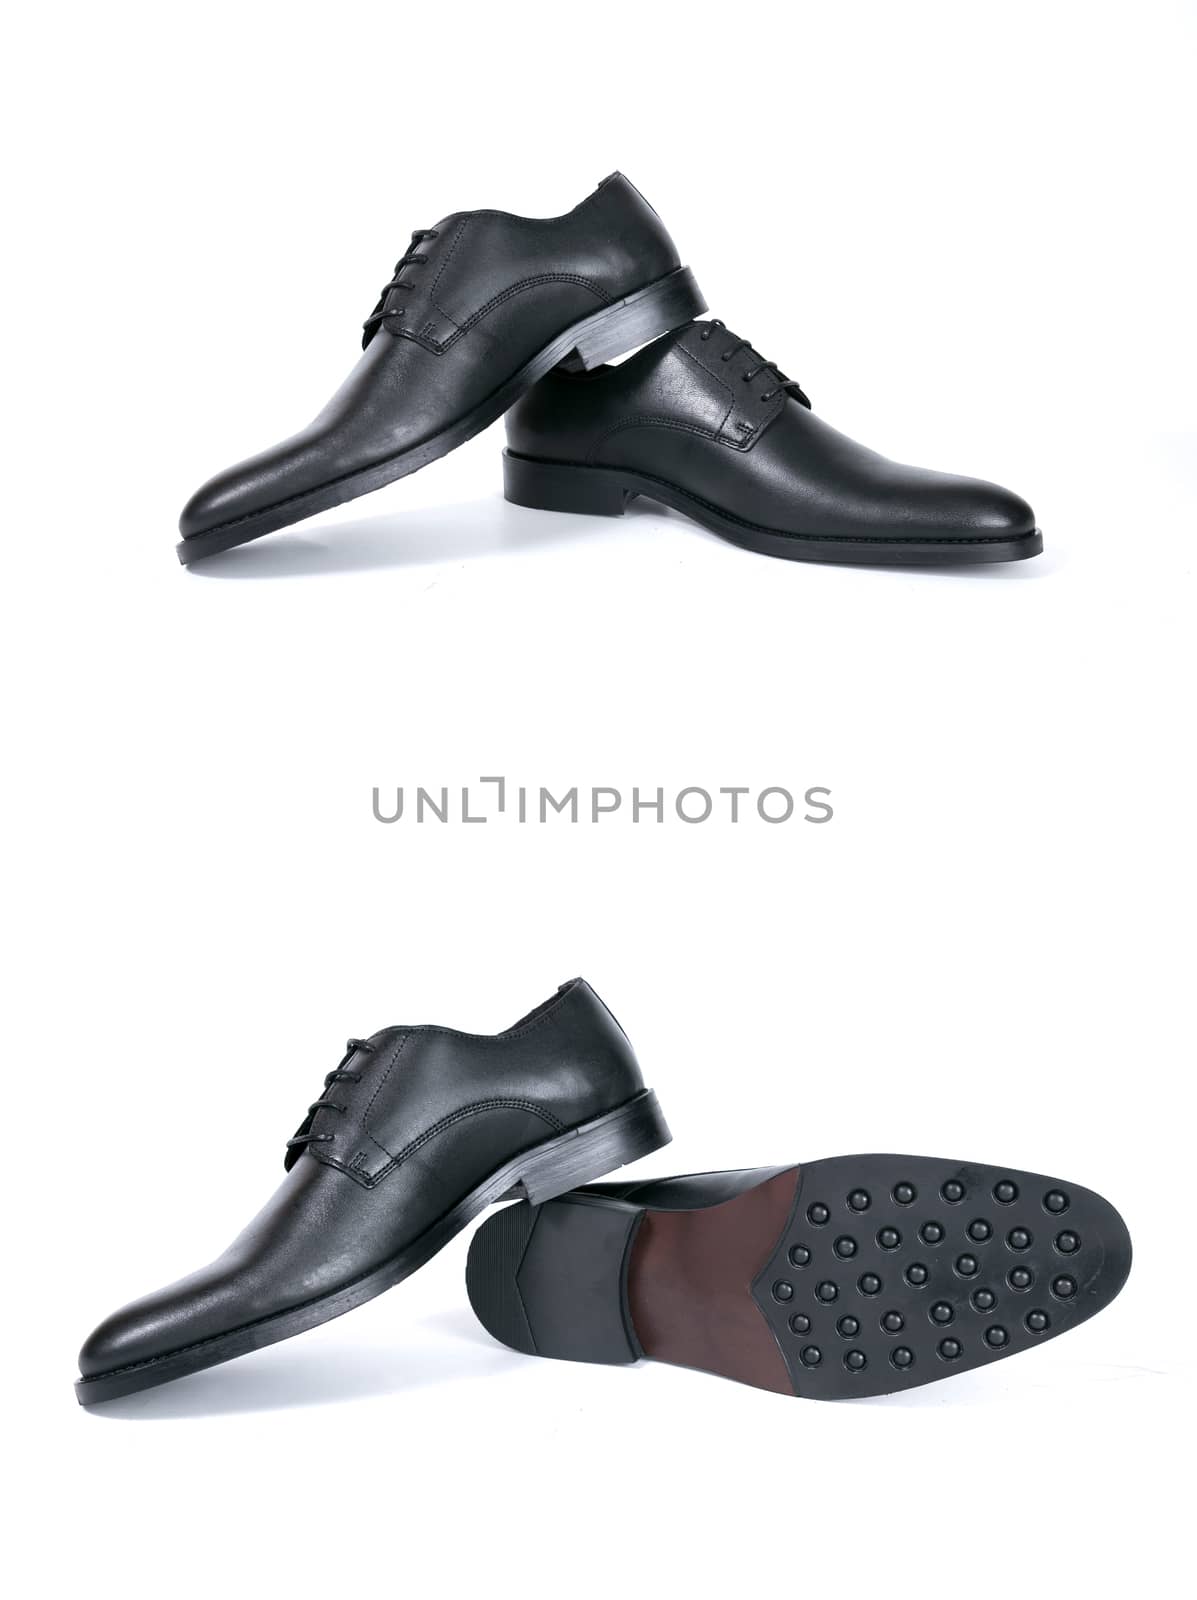 Group of black shoes on white background, isolated product.